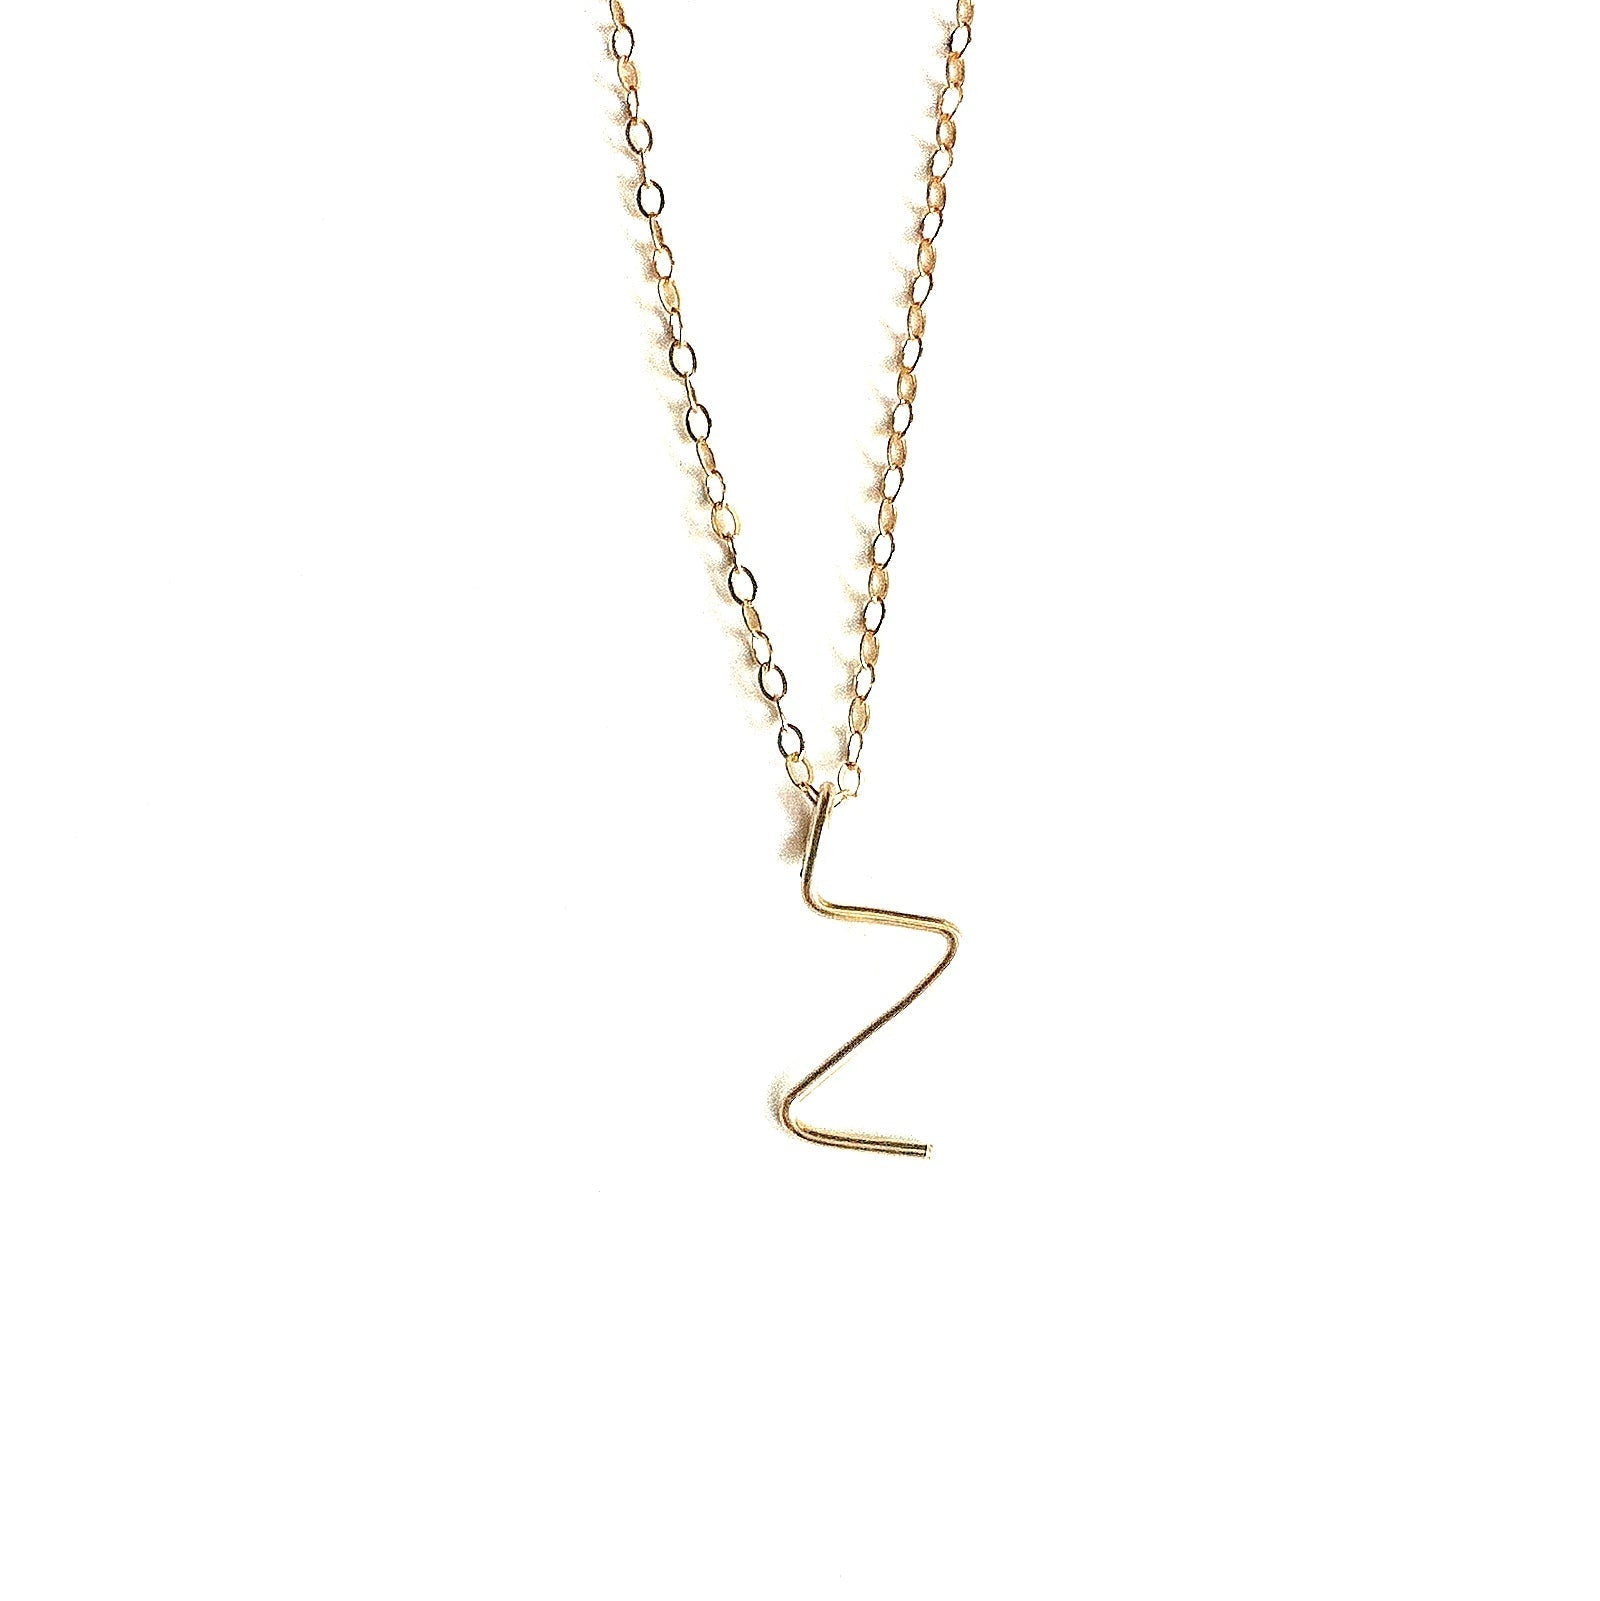 Handmade Initial Necklace Robyn Canady z 14K Gold Filled 